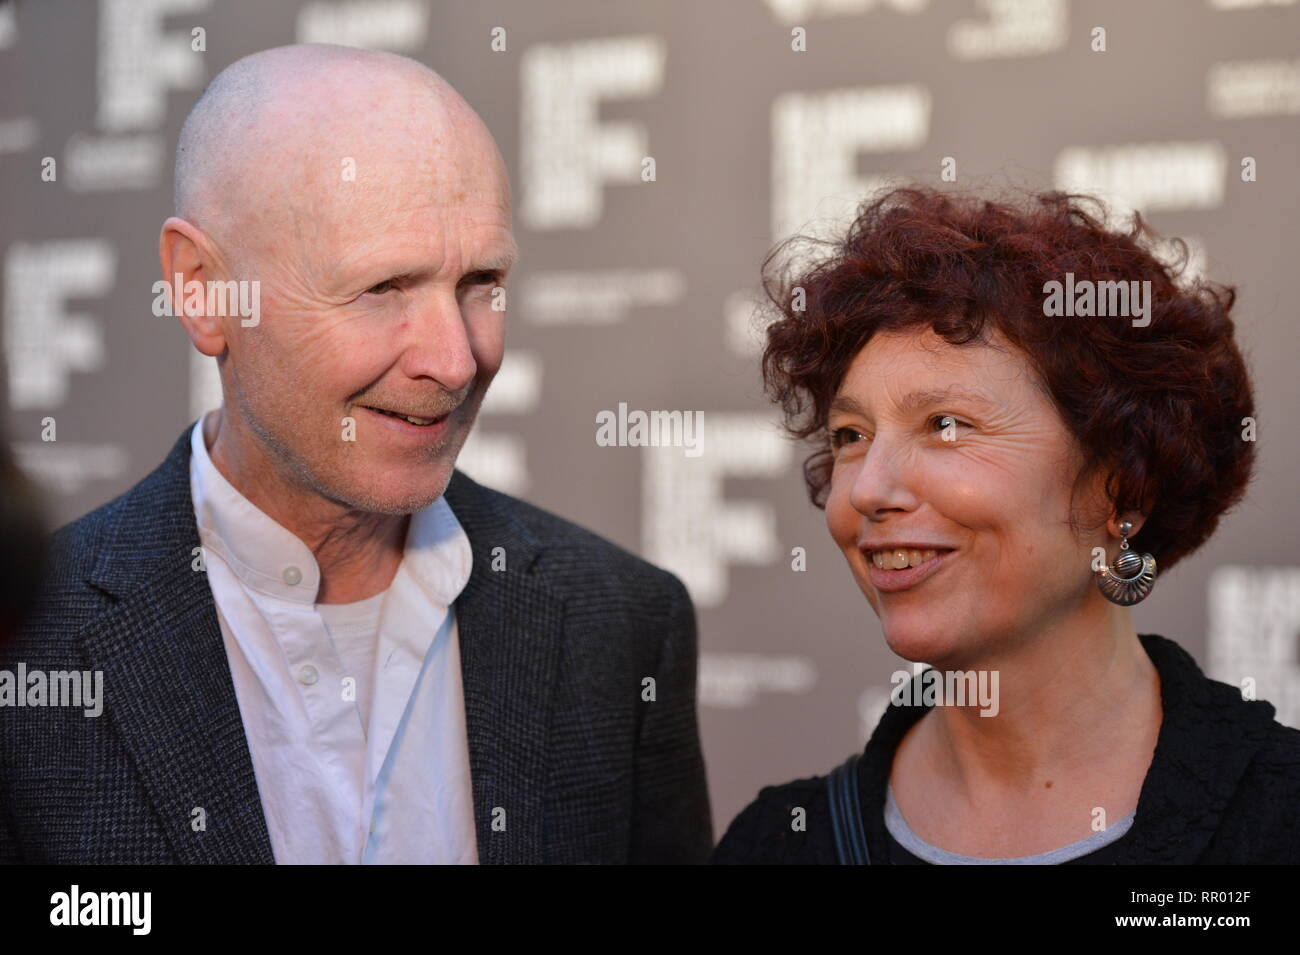 Glasgow, UK. 23 February 2019.  Red Carpet at the Glasgow Film Theatre for the Scottish Premier of the film, Yuli.  Directed by Iciar Bollain (right) and written by Paul Laverty (left), starring actor, Carlos Acosta. Credit: Colin Fisher/Alamy Live News Stock Photo